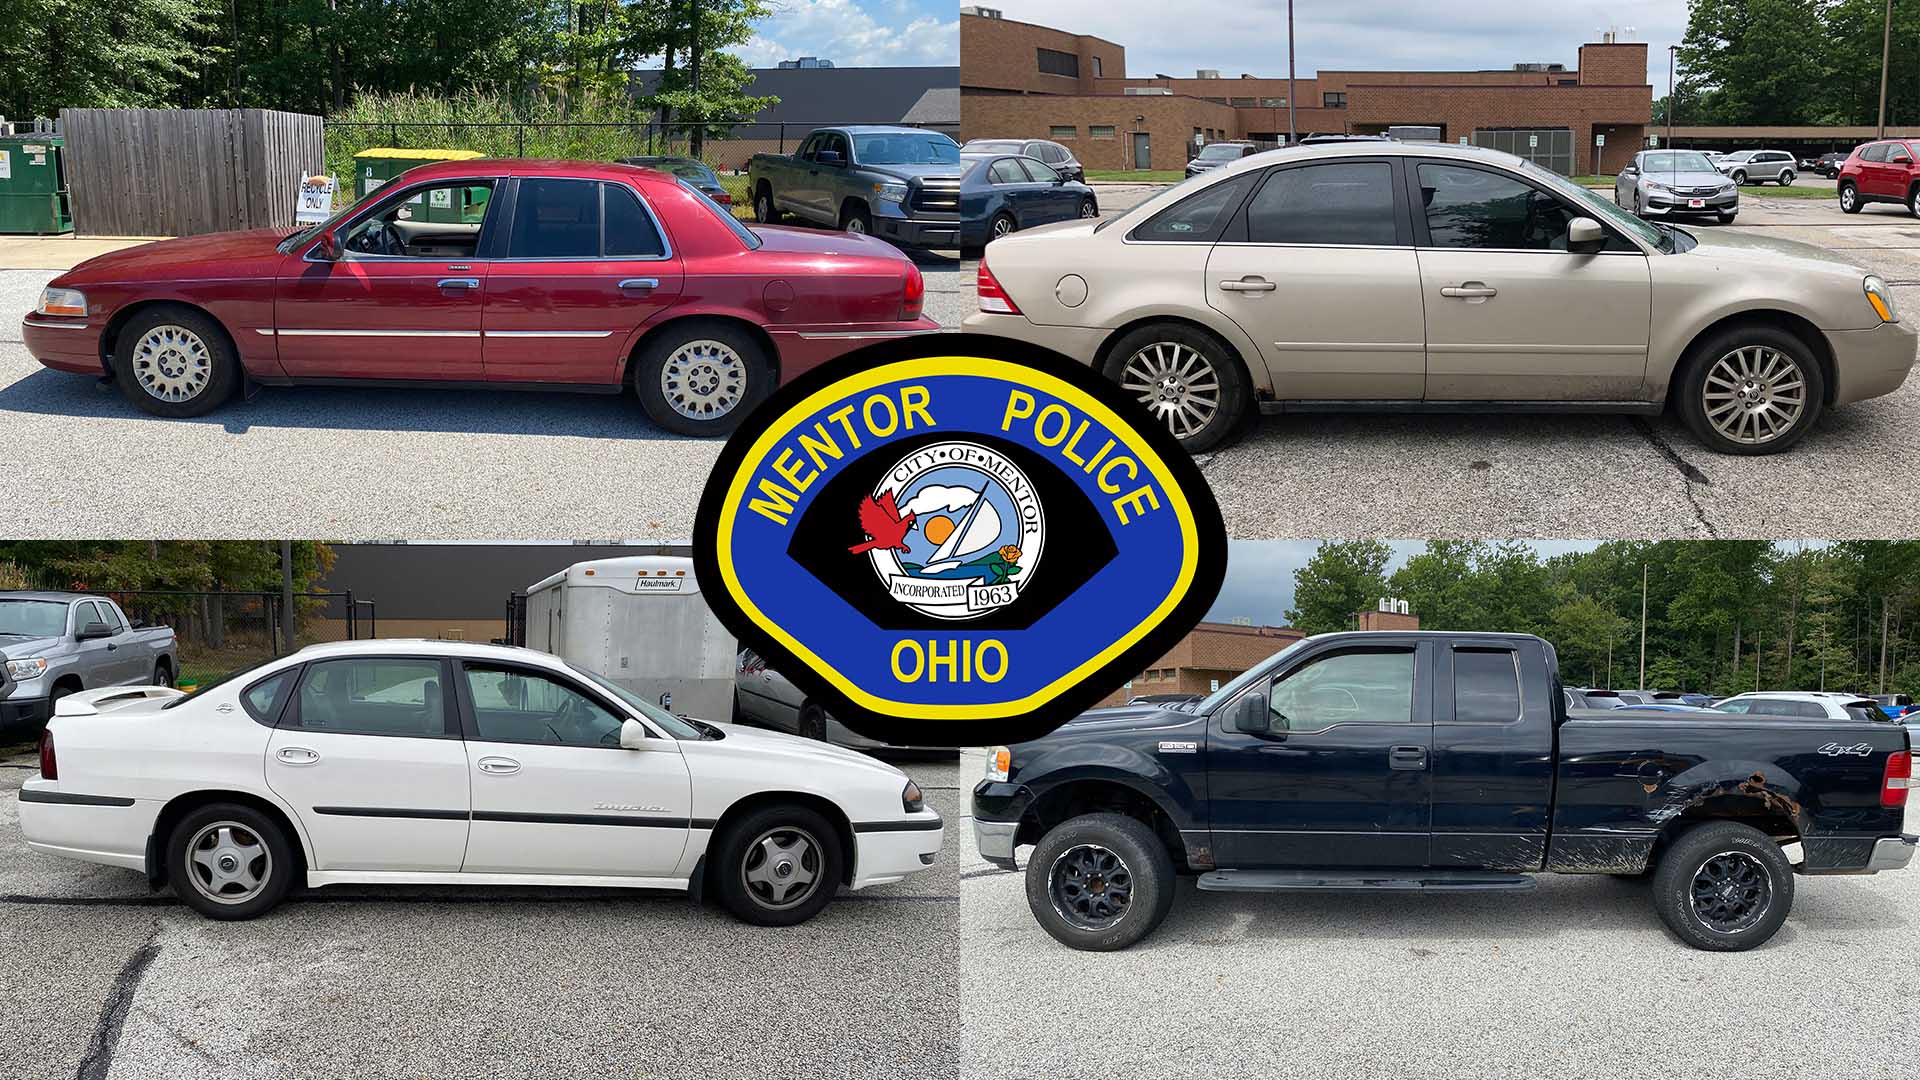 Elmira Police Department auctioning off 15 vehicles - WENY News